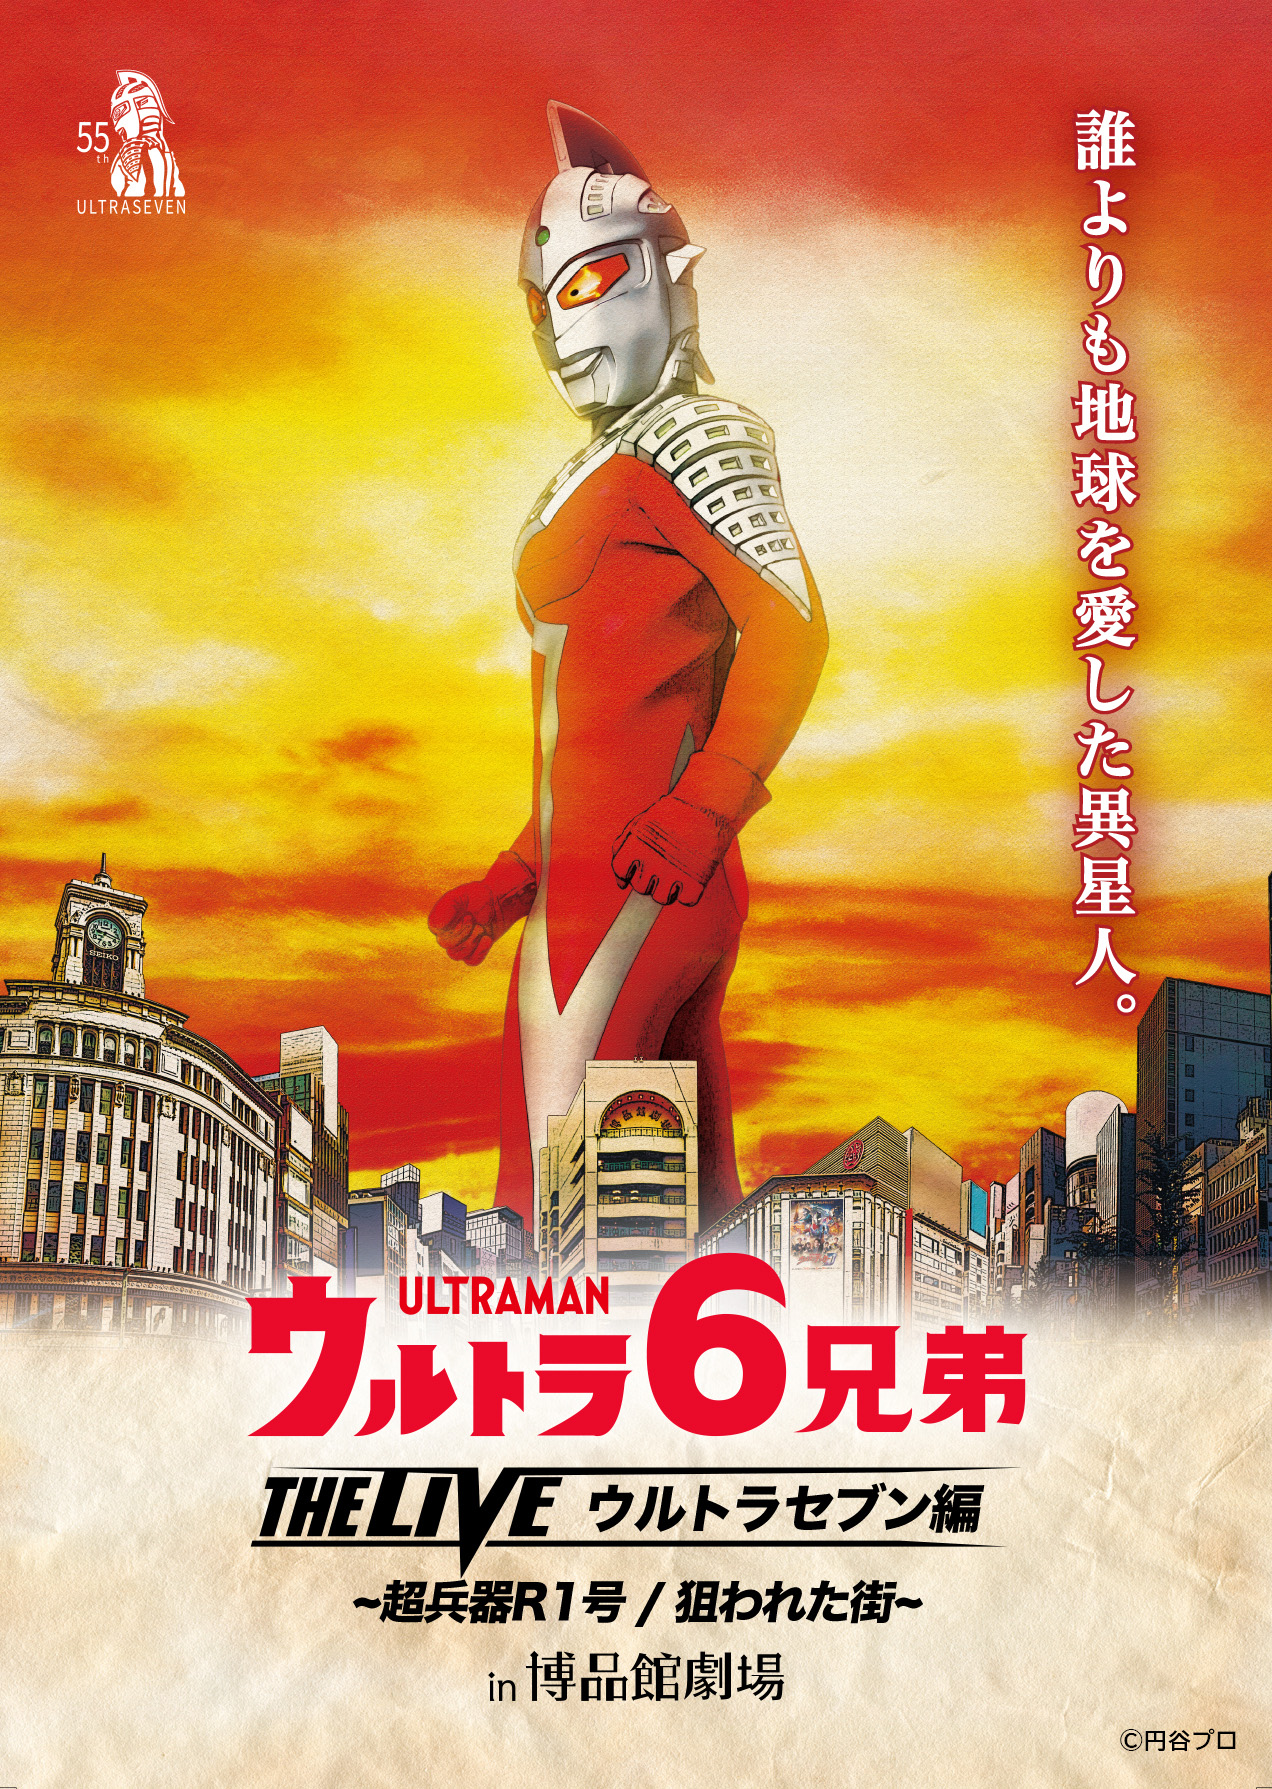 6 Ultra Brothers THE LIVE: Featuring Ultraseven Vol. 1 | Ultraman